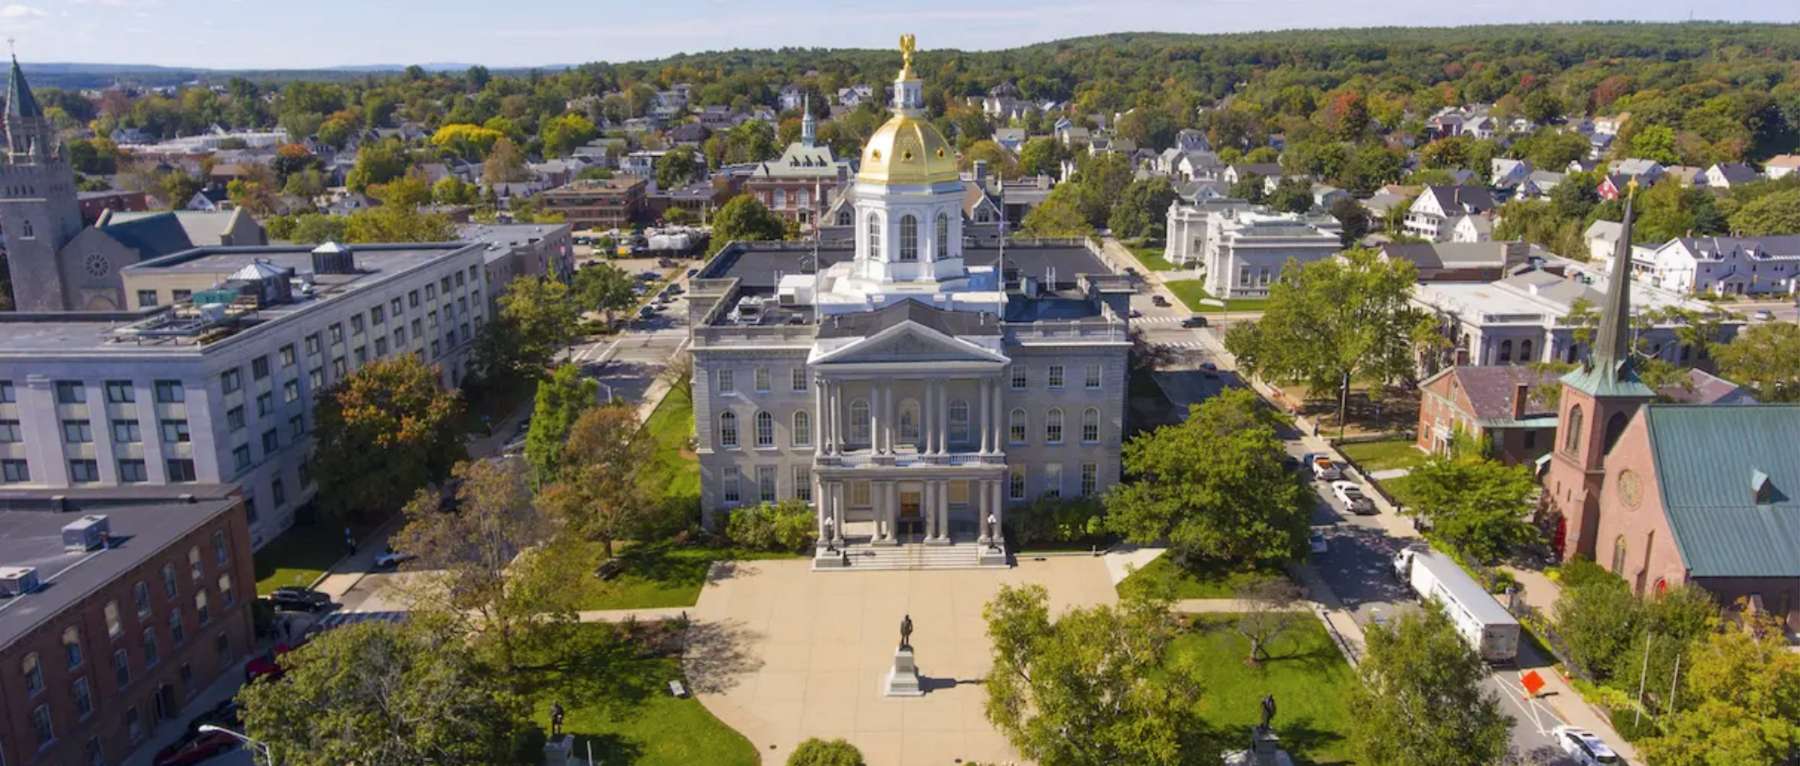 Spring View of the NH Capitol - Concord, NH - Photo Credit Shutterstock